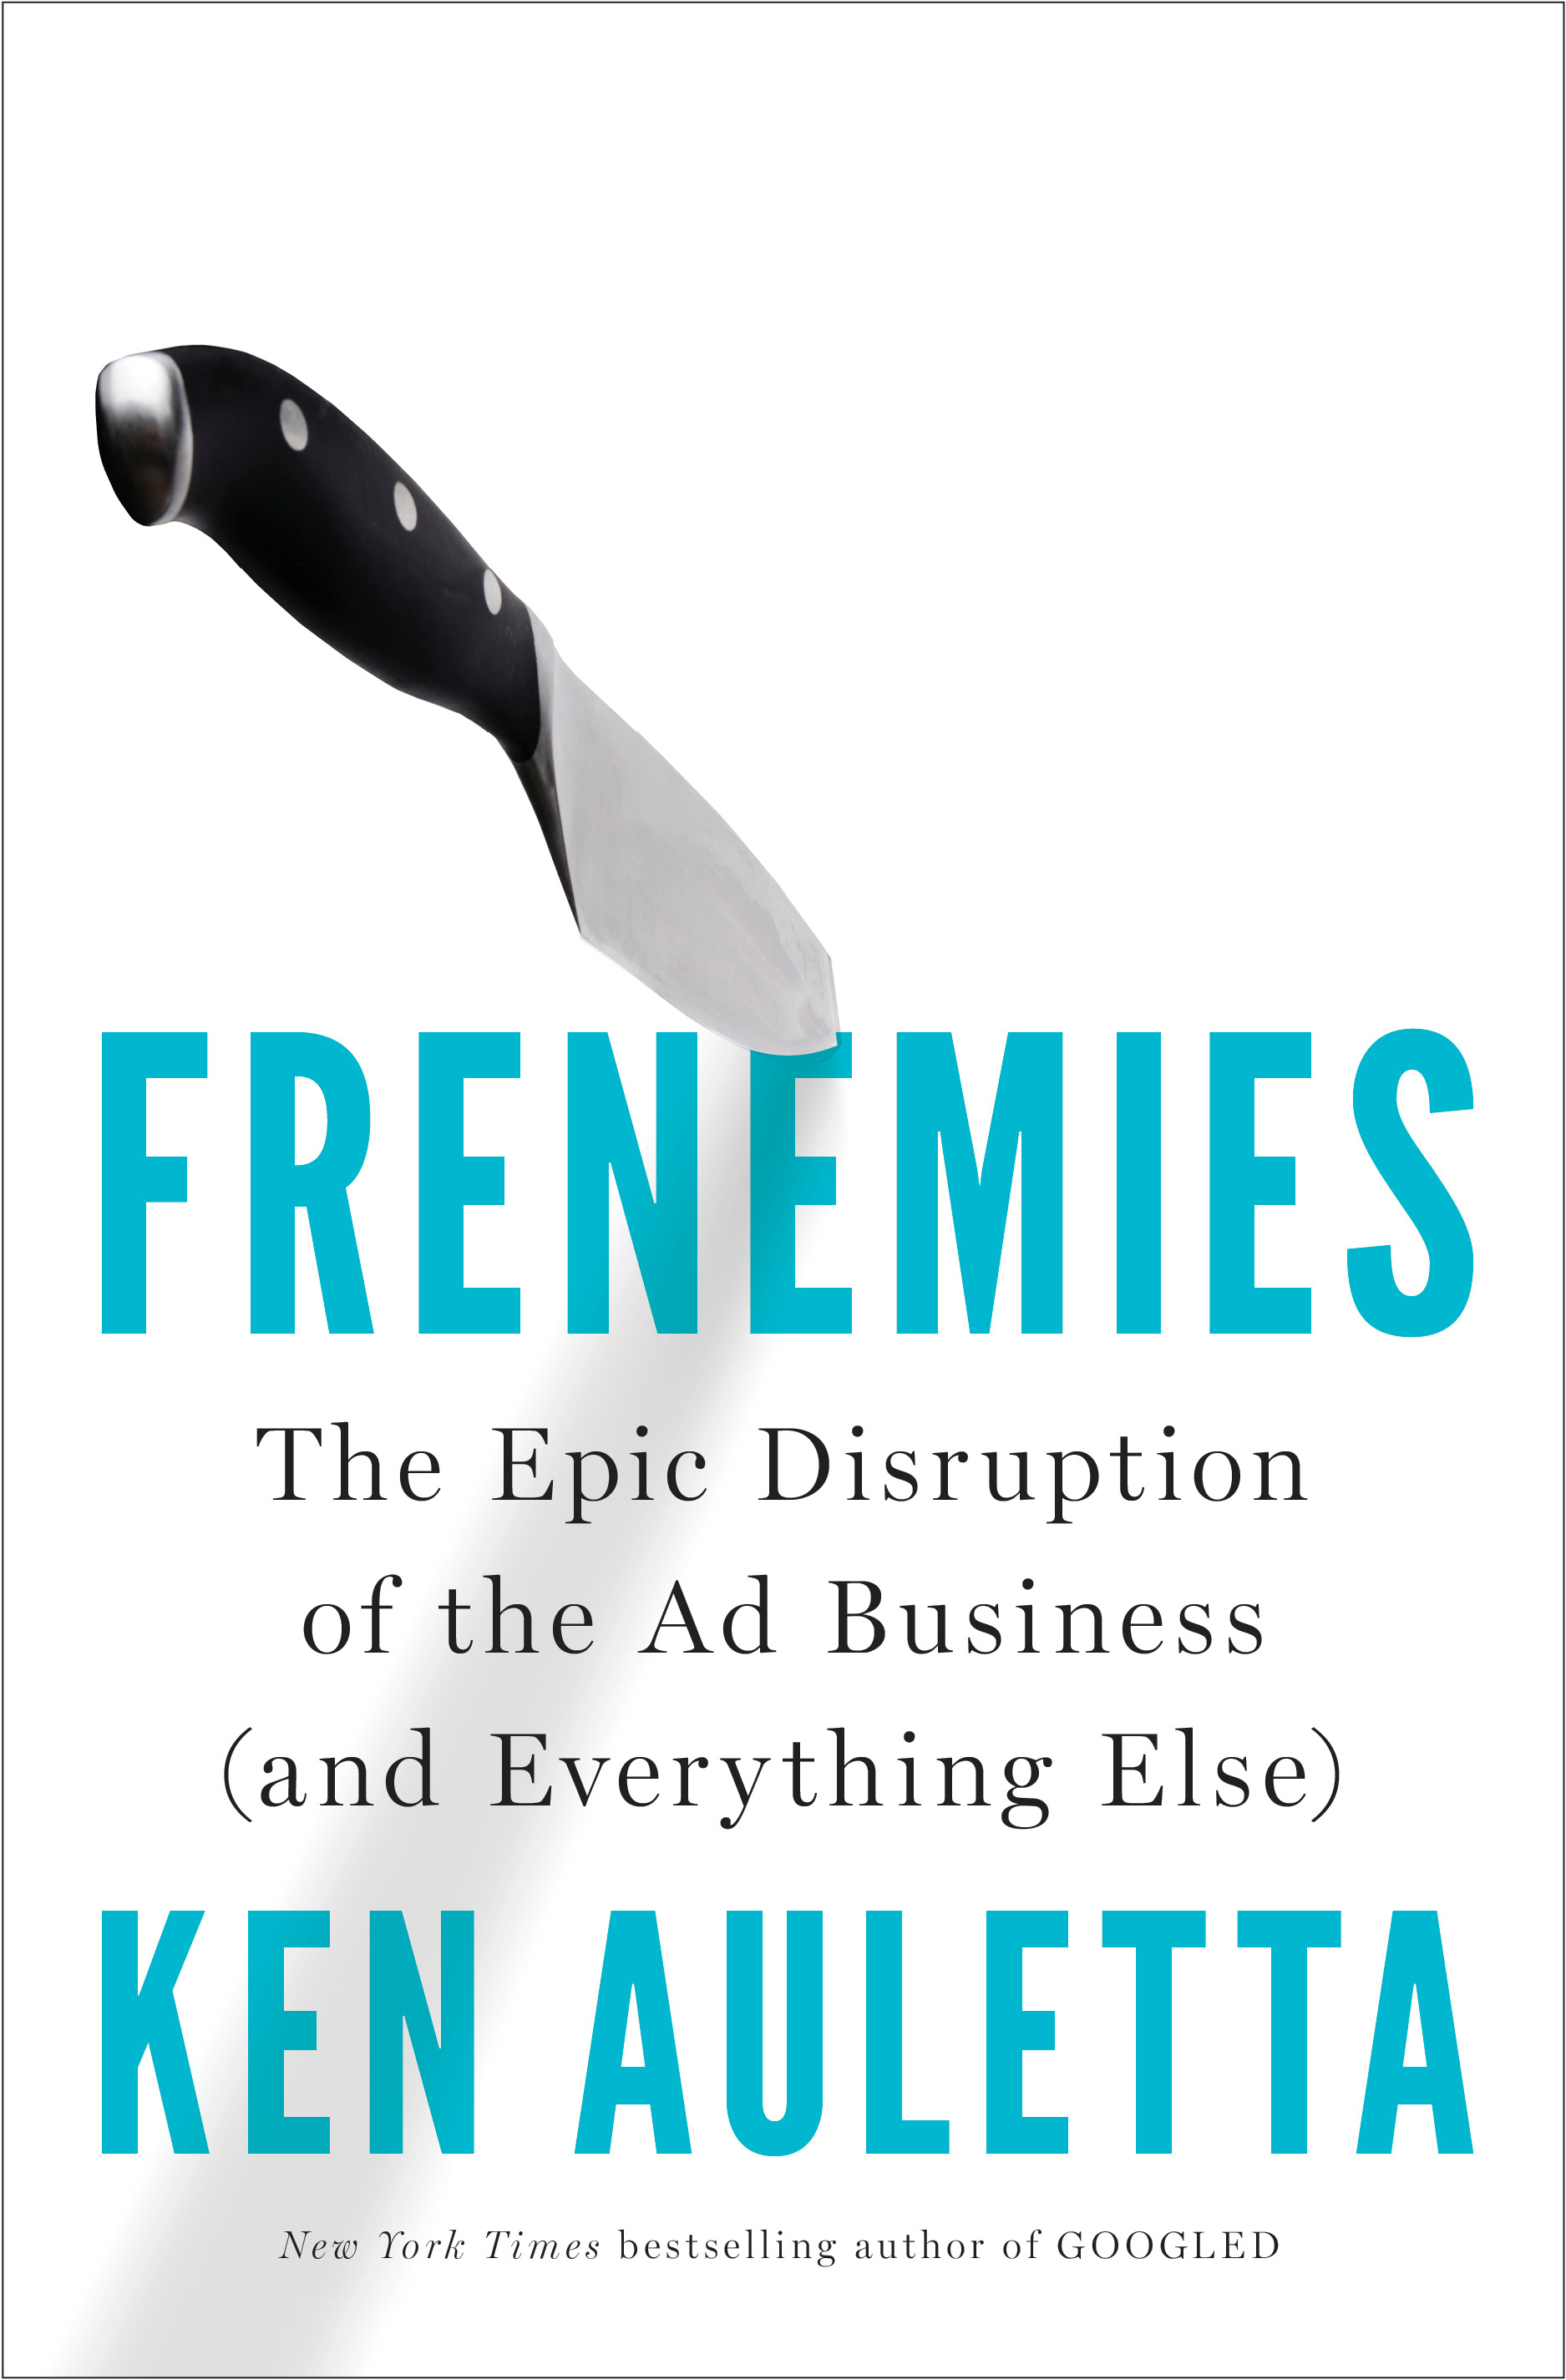 “Frenemies: The Epic Disruption of the Ad Business (and Everything Else)” by Ken Auletta (Penguin Press)